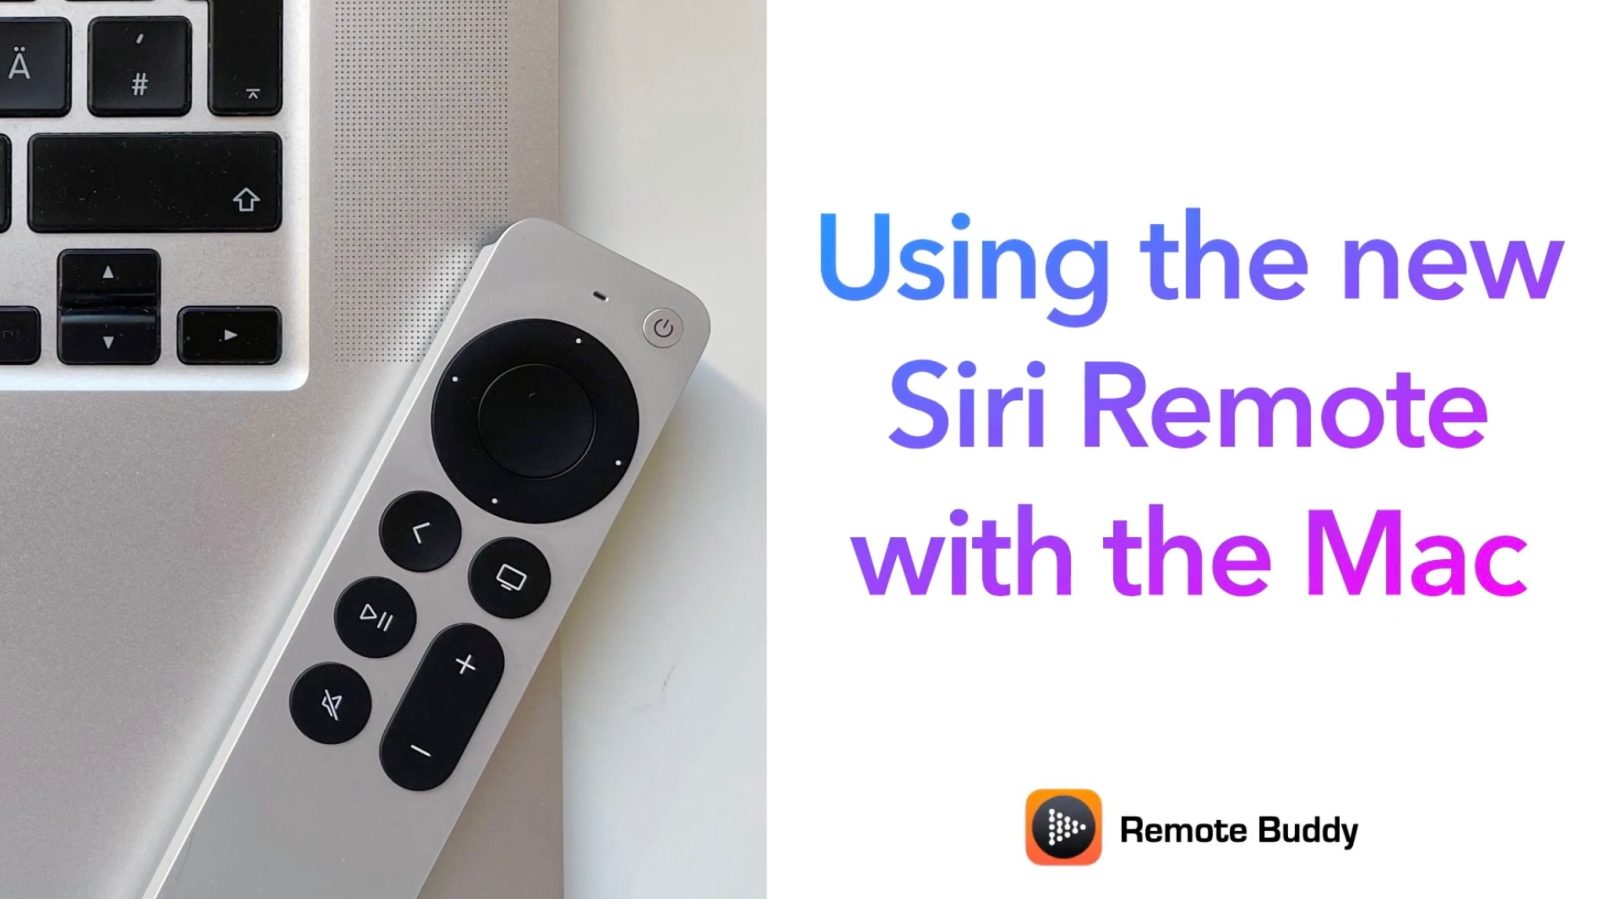 fiktiv Touhou faglært New Siri Remote support comes to Mac for presentations, media, more with  Remote Buddy - 9to5Mac